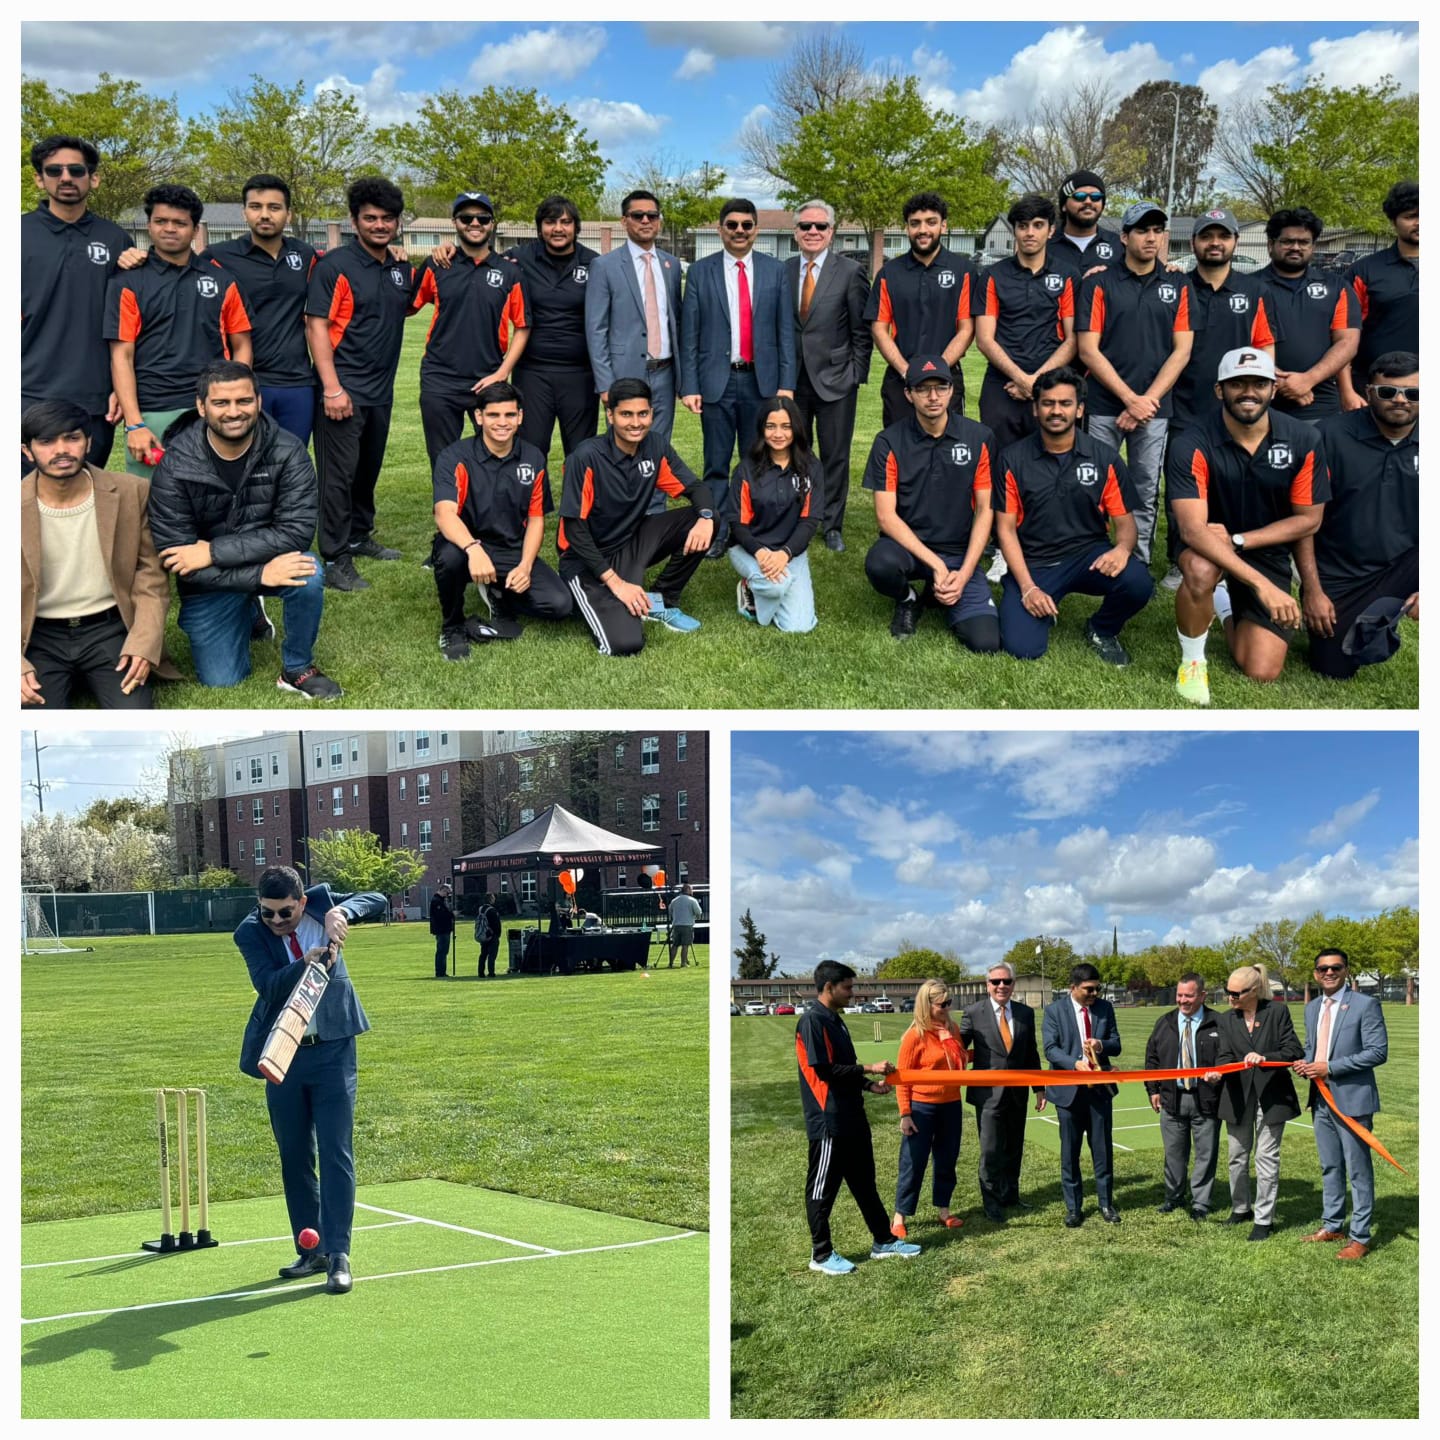 Cricket pitch at the University of the Pacific inaugurated by Consul General Reddy